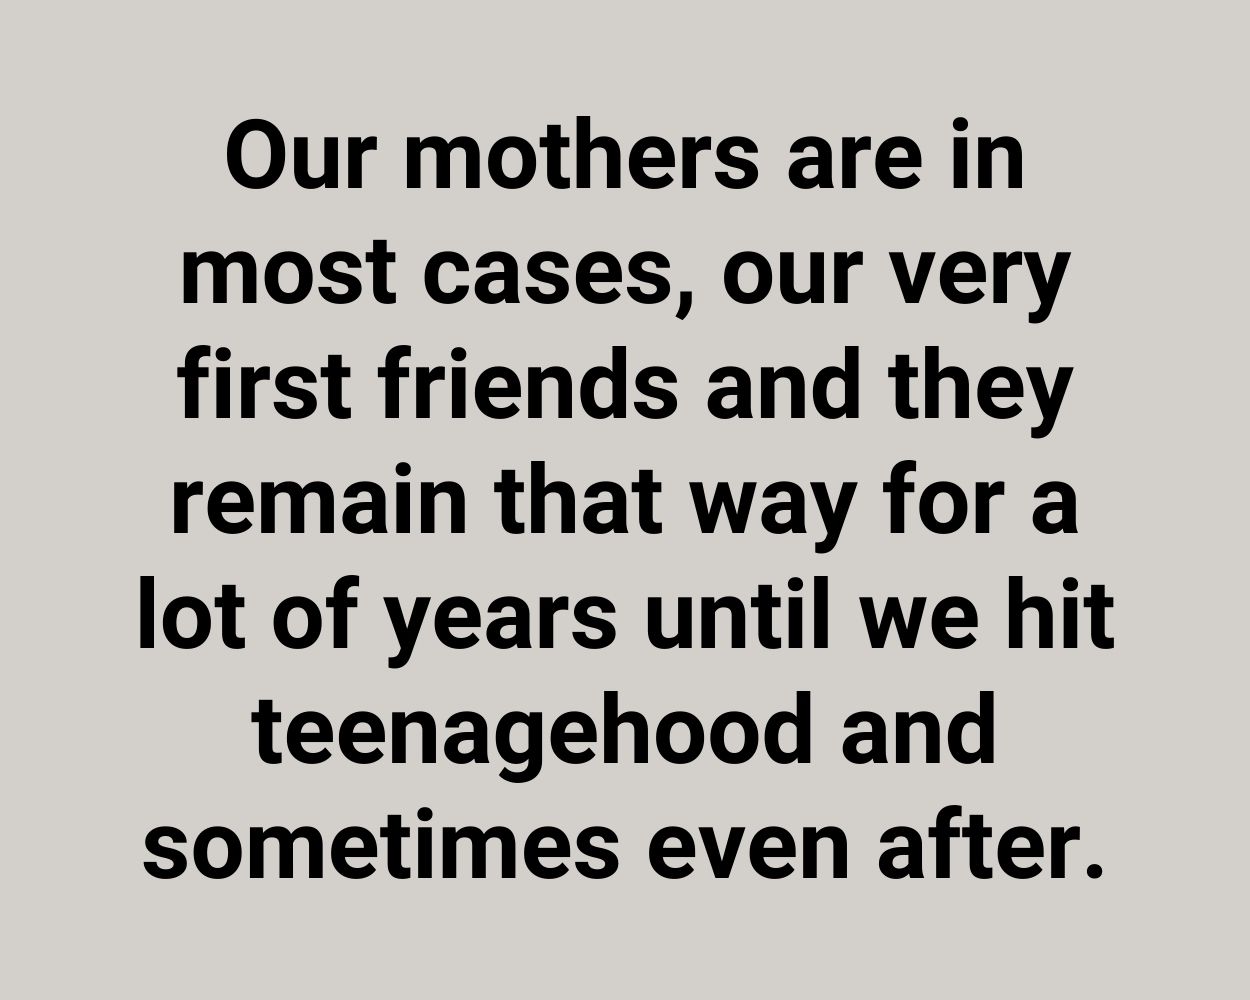 Our mothers are in most cases, our very first friends and they